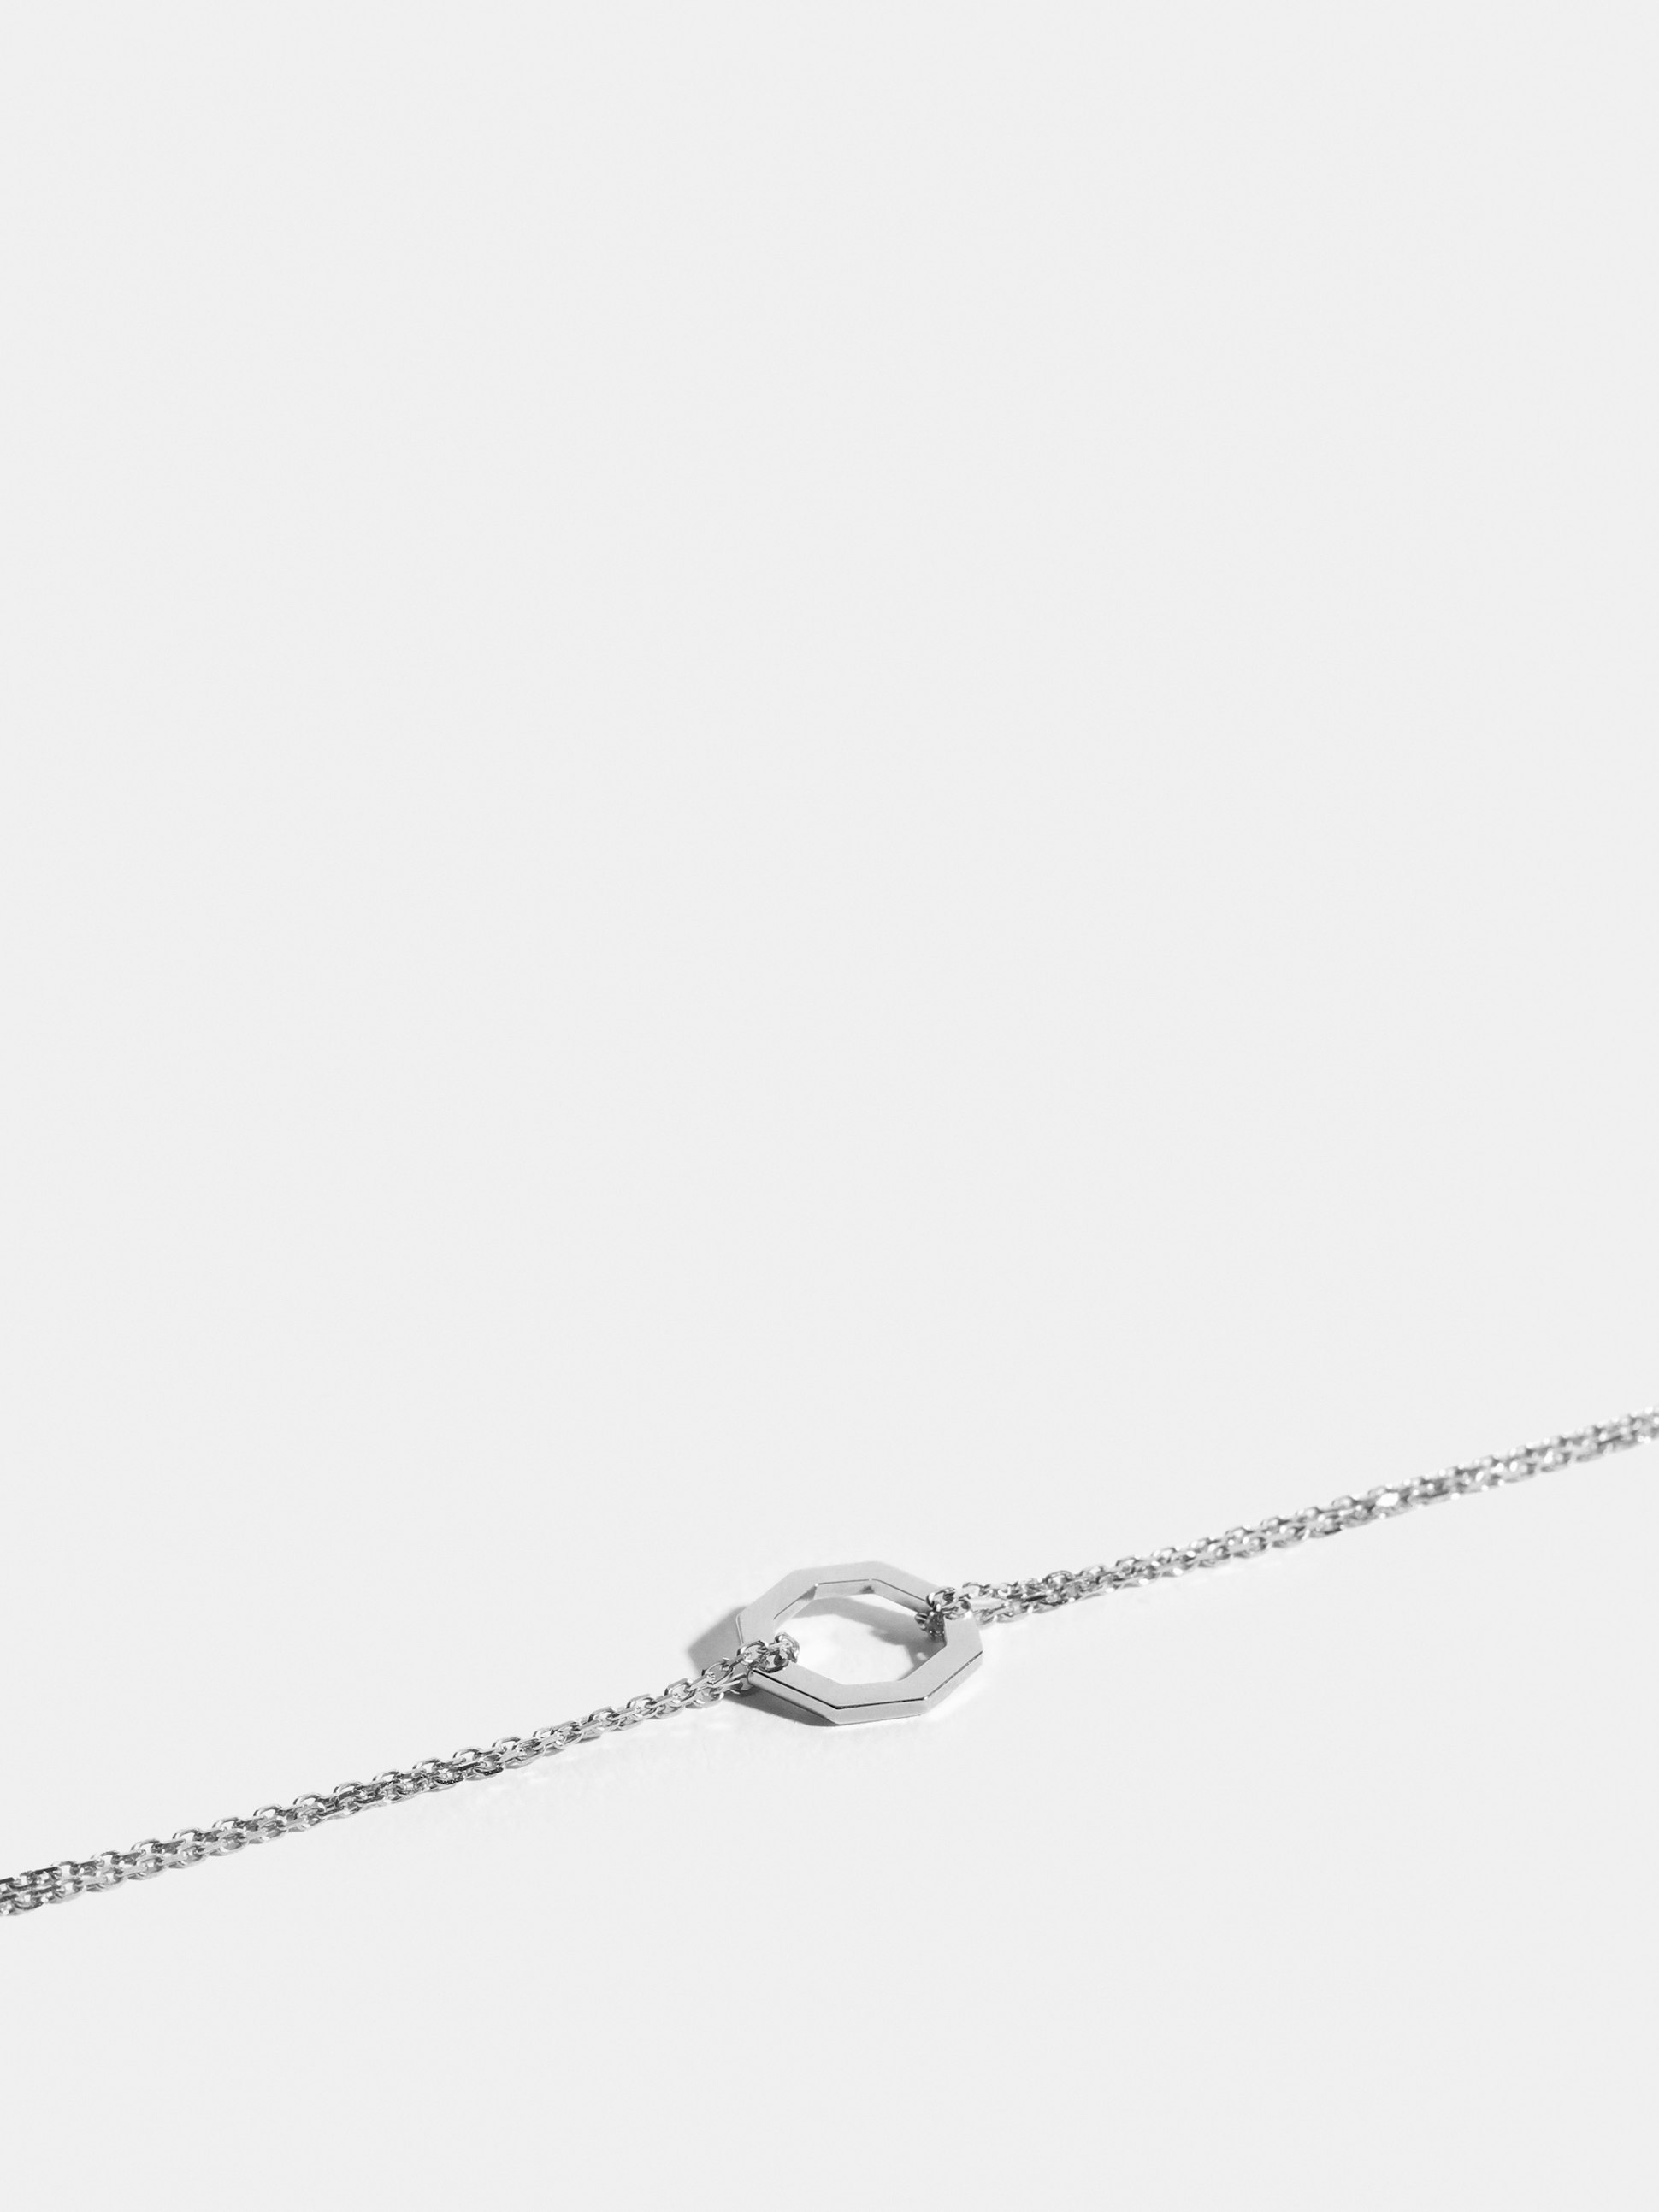 Octogone motif in 18k Fairmined ethical white gold, on a chain.